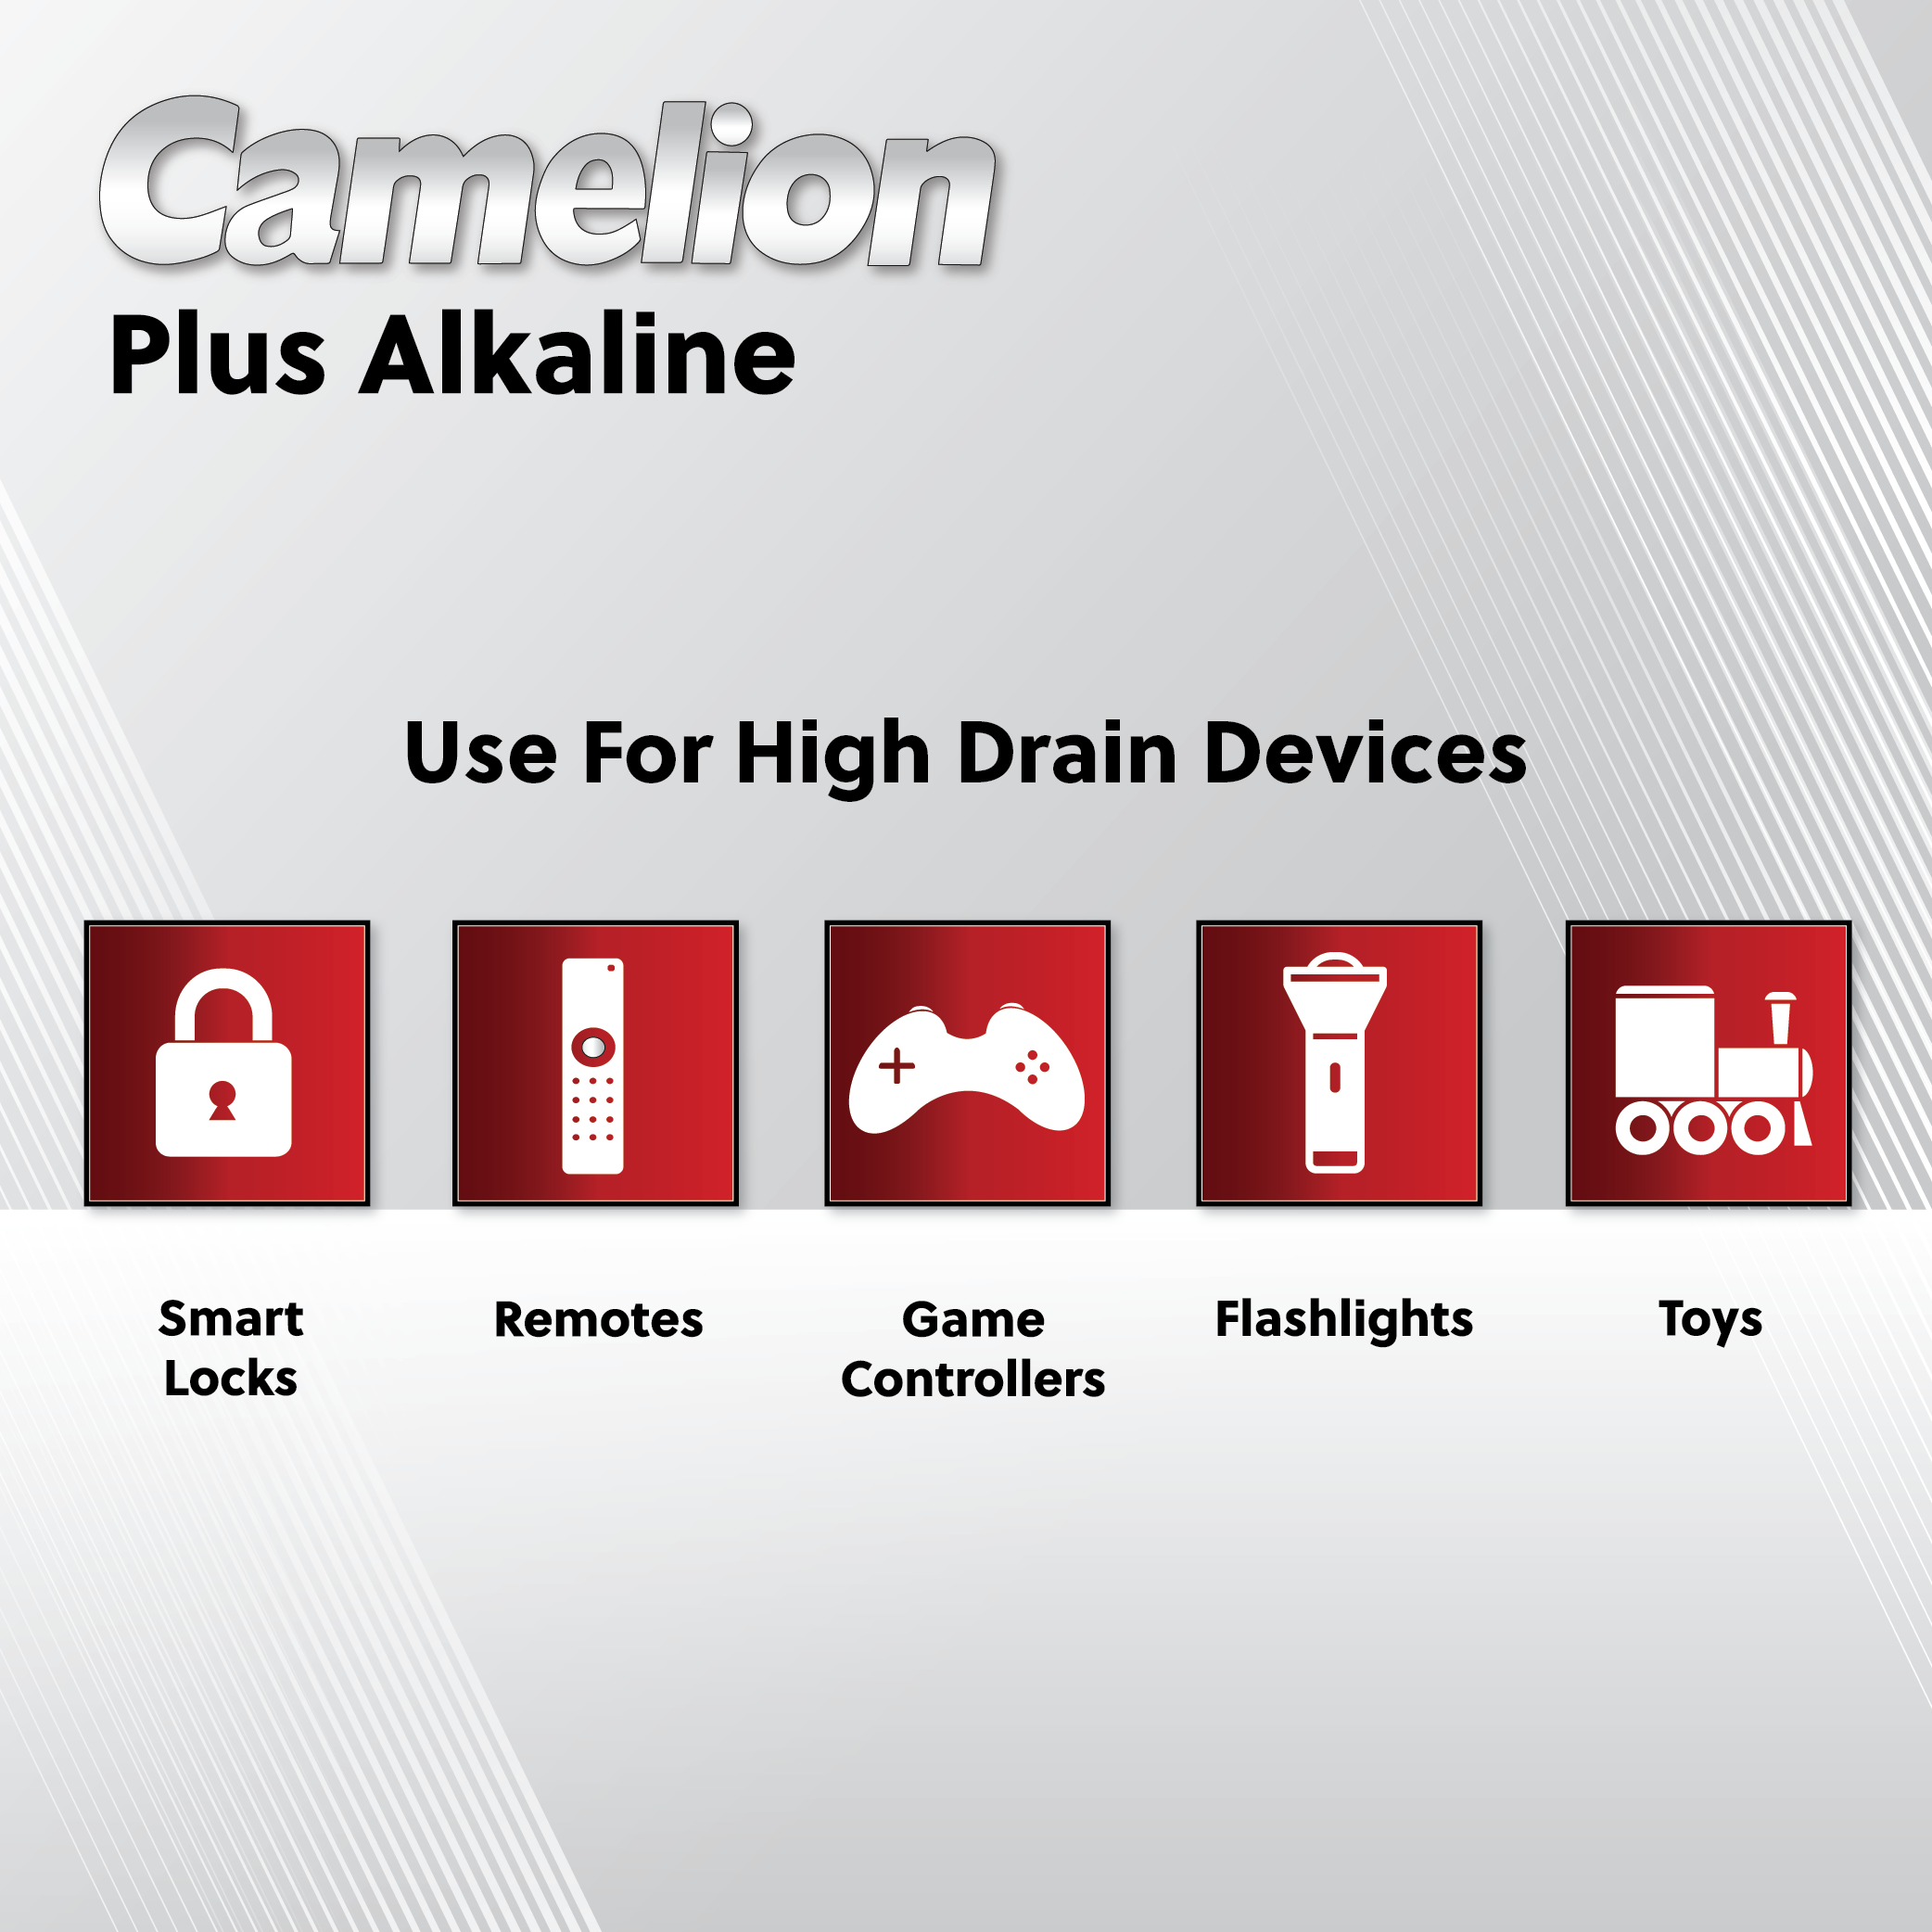 Camelion AAA Alkaline Plus Blister Pack of 4